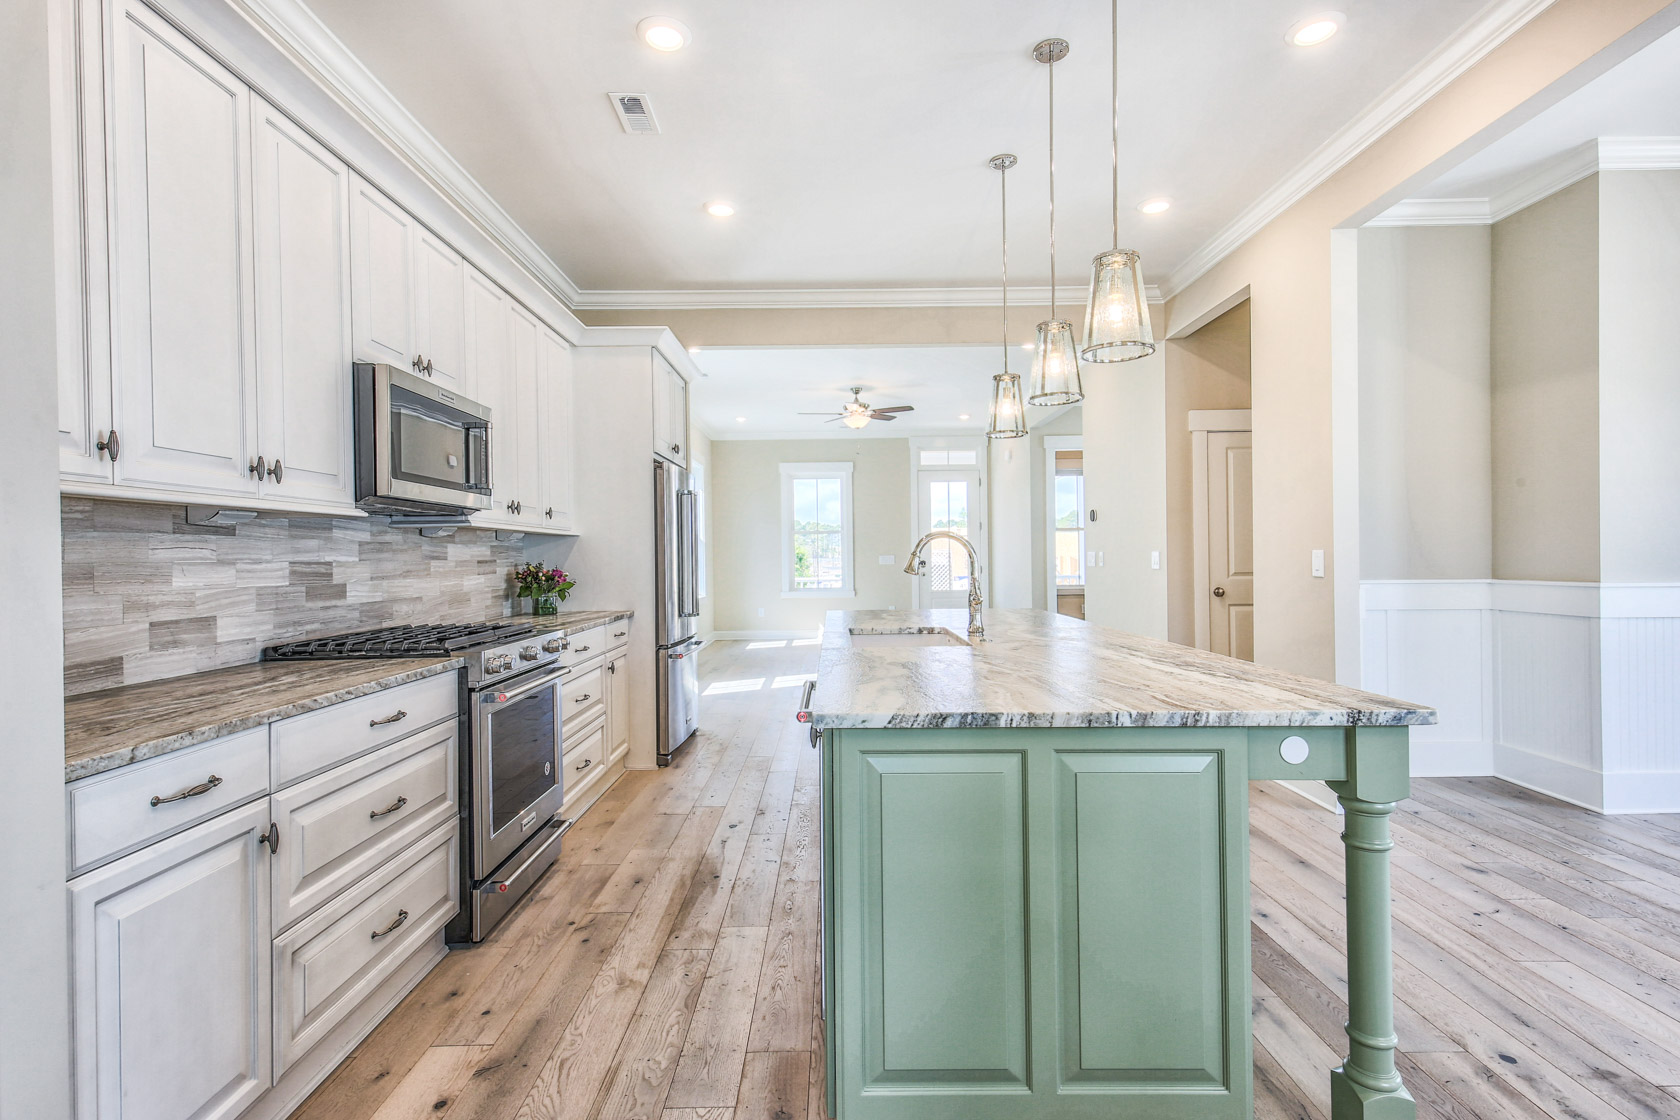 seafoam kitchen island and leather granite countertops in a low country style home